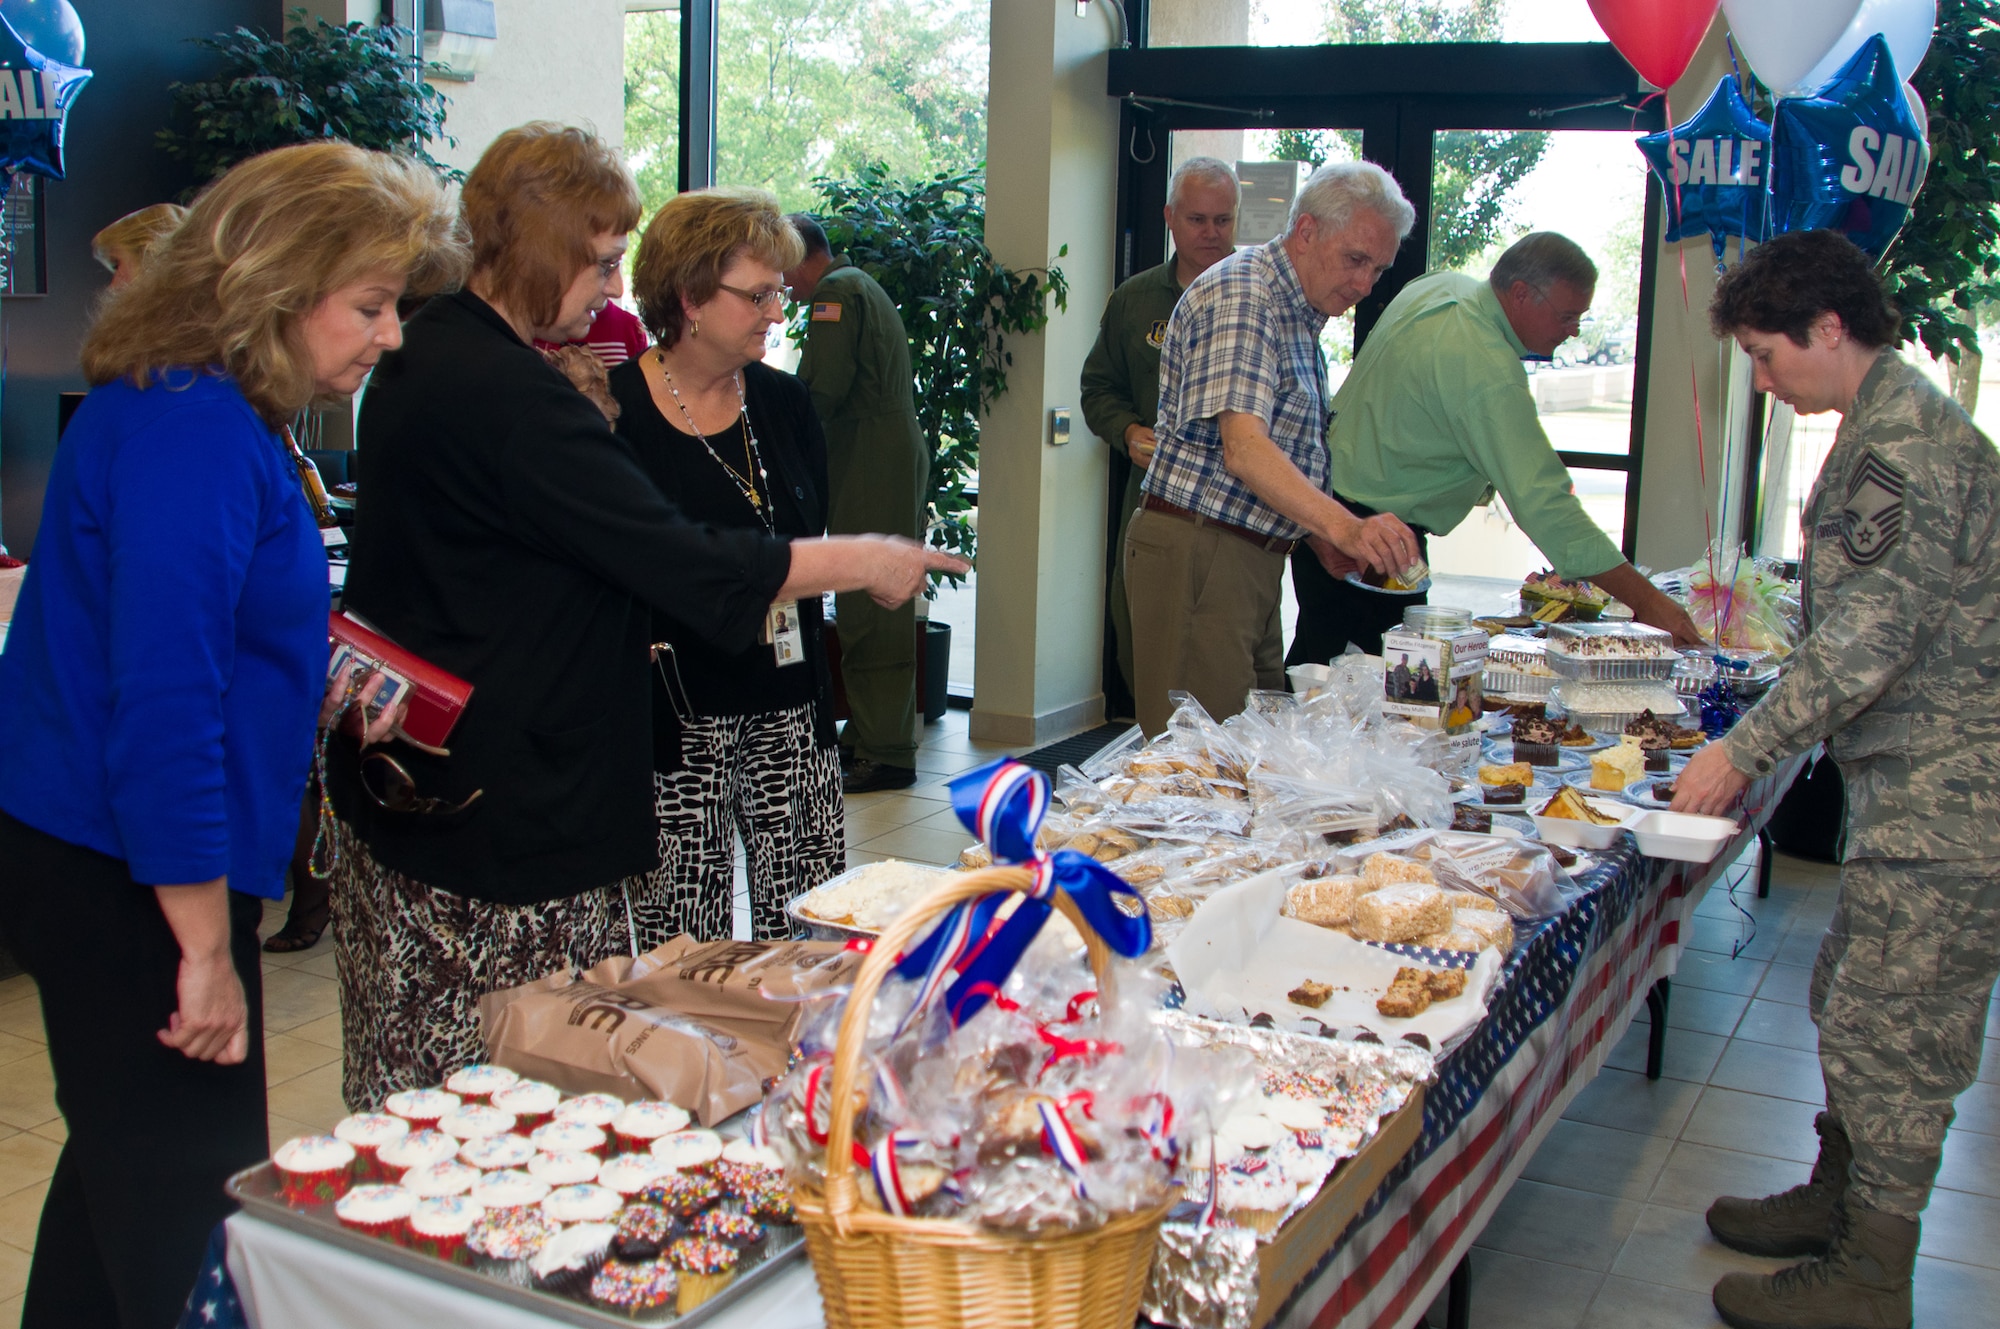 Headquarters Air Force Reserve Command personnel hosted a bake sale May 19, 2011, to support two servicemembers whose children were wounded in Afghanistan. Proceeds from the sale will go to offset medical costs for Army infantryman Cpl. Griffin Fitzgerald, son of CMSgt. Richard Brown, and Marine combat engineer Cpl. Tony Mullis, son of Master Sgt. Cozetta Quigg, who lost limbs in battle and are recovering at Walter Reed Army Medical Center, in Washington, D.C. (U.S. Air Force photo/Staff Sgt. Alexy Saltekoff)